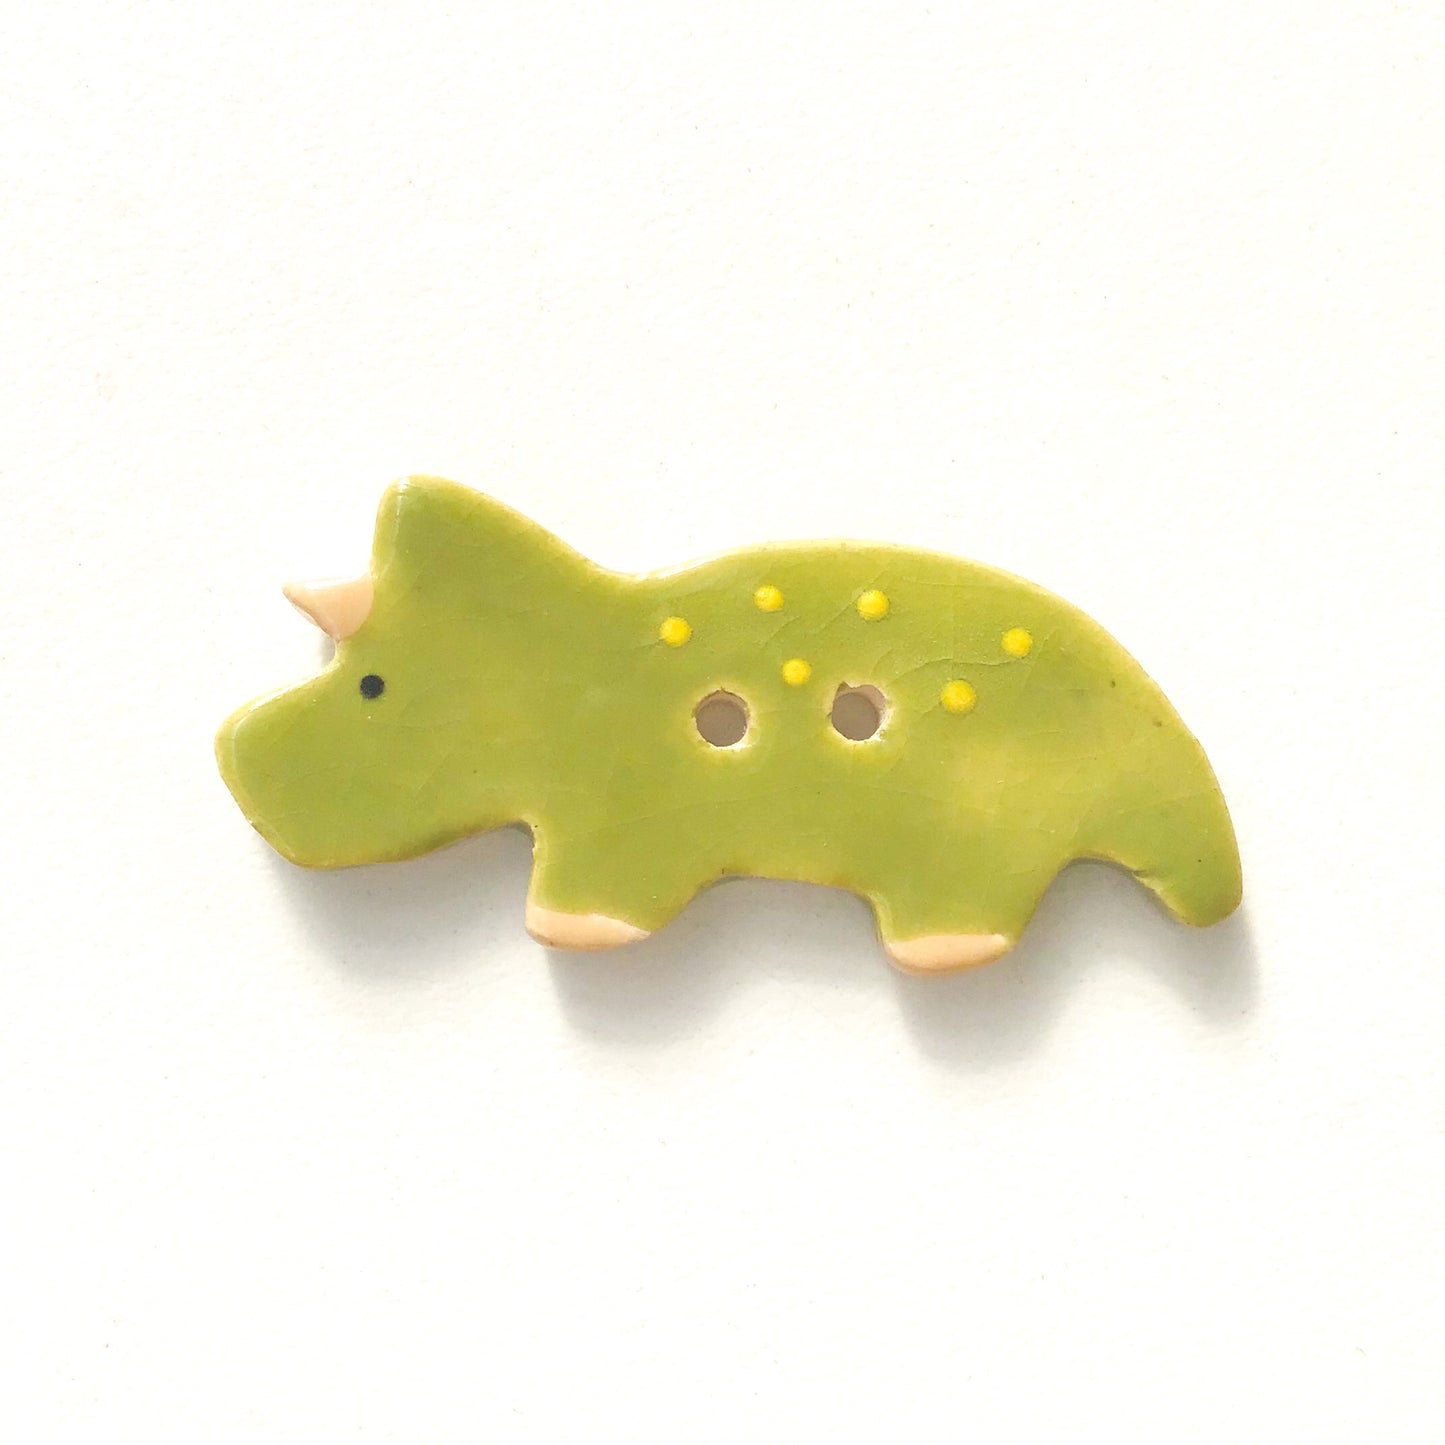 Triceratops Buttons - Ceramic Dinosaur Buttons - Children's Animal Buttons (ws-247)